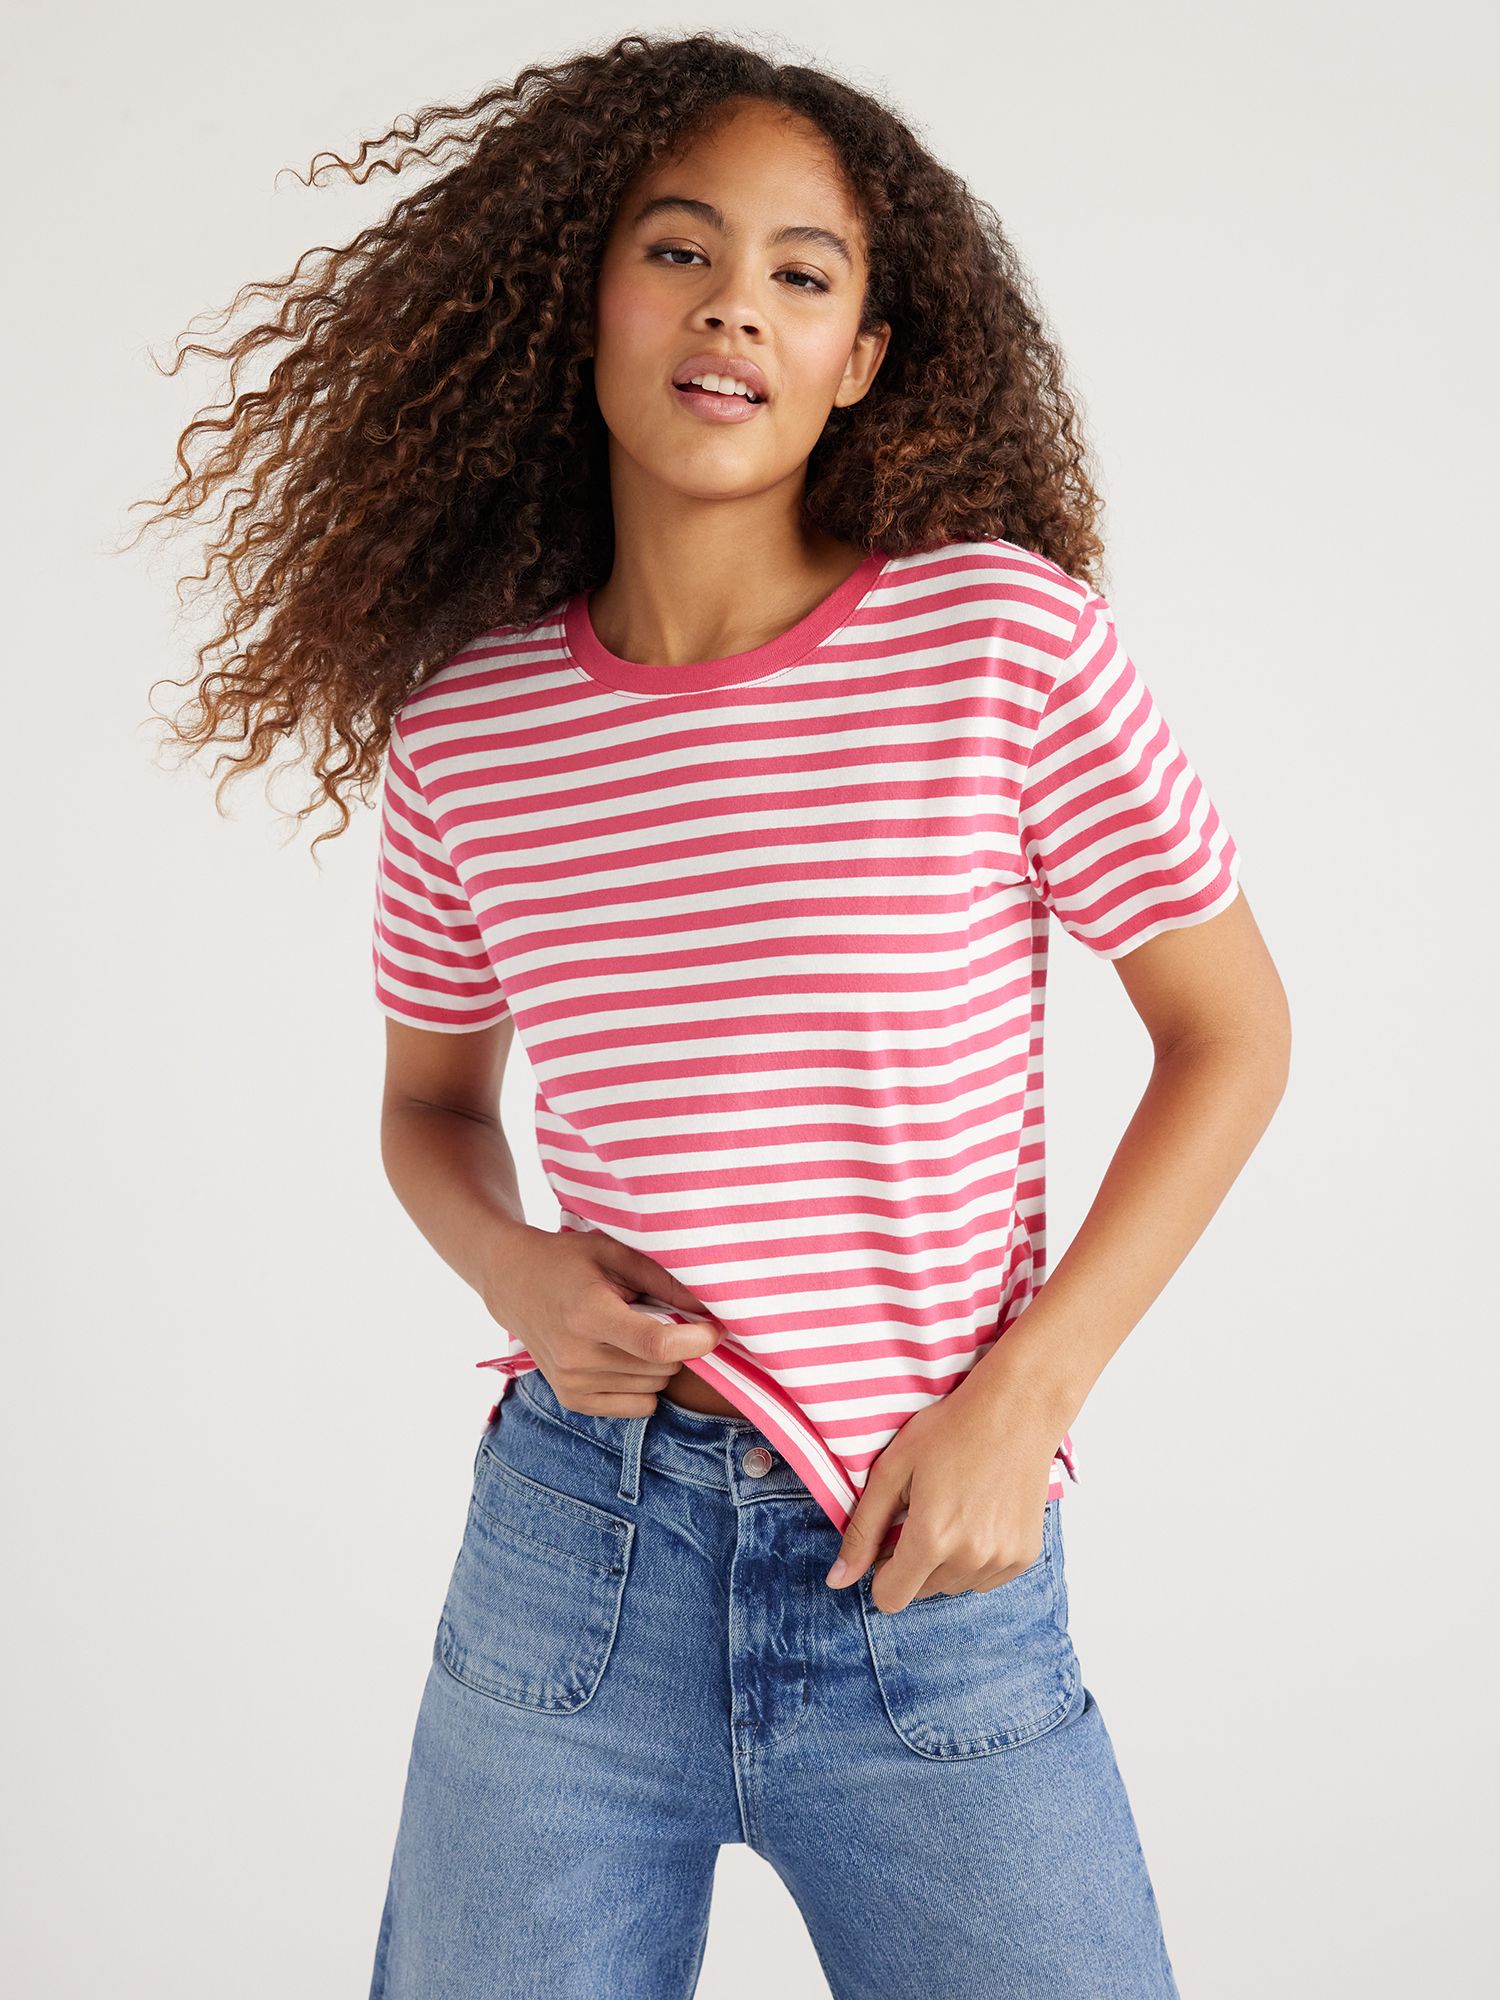 Free Assembly Women's Crop Box Tee with Short Sleeves, Sizes XS-XXL | Walmart (US)